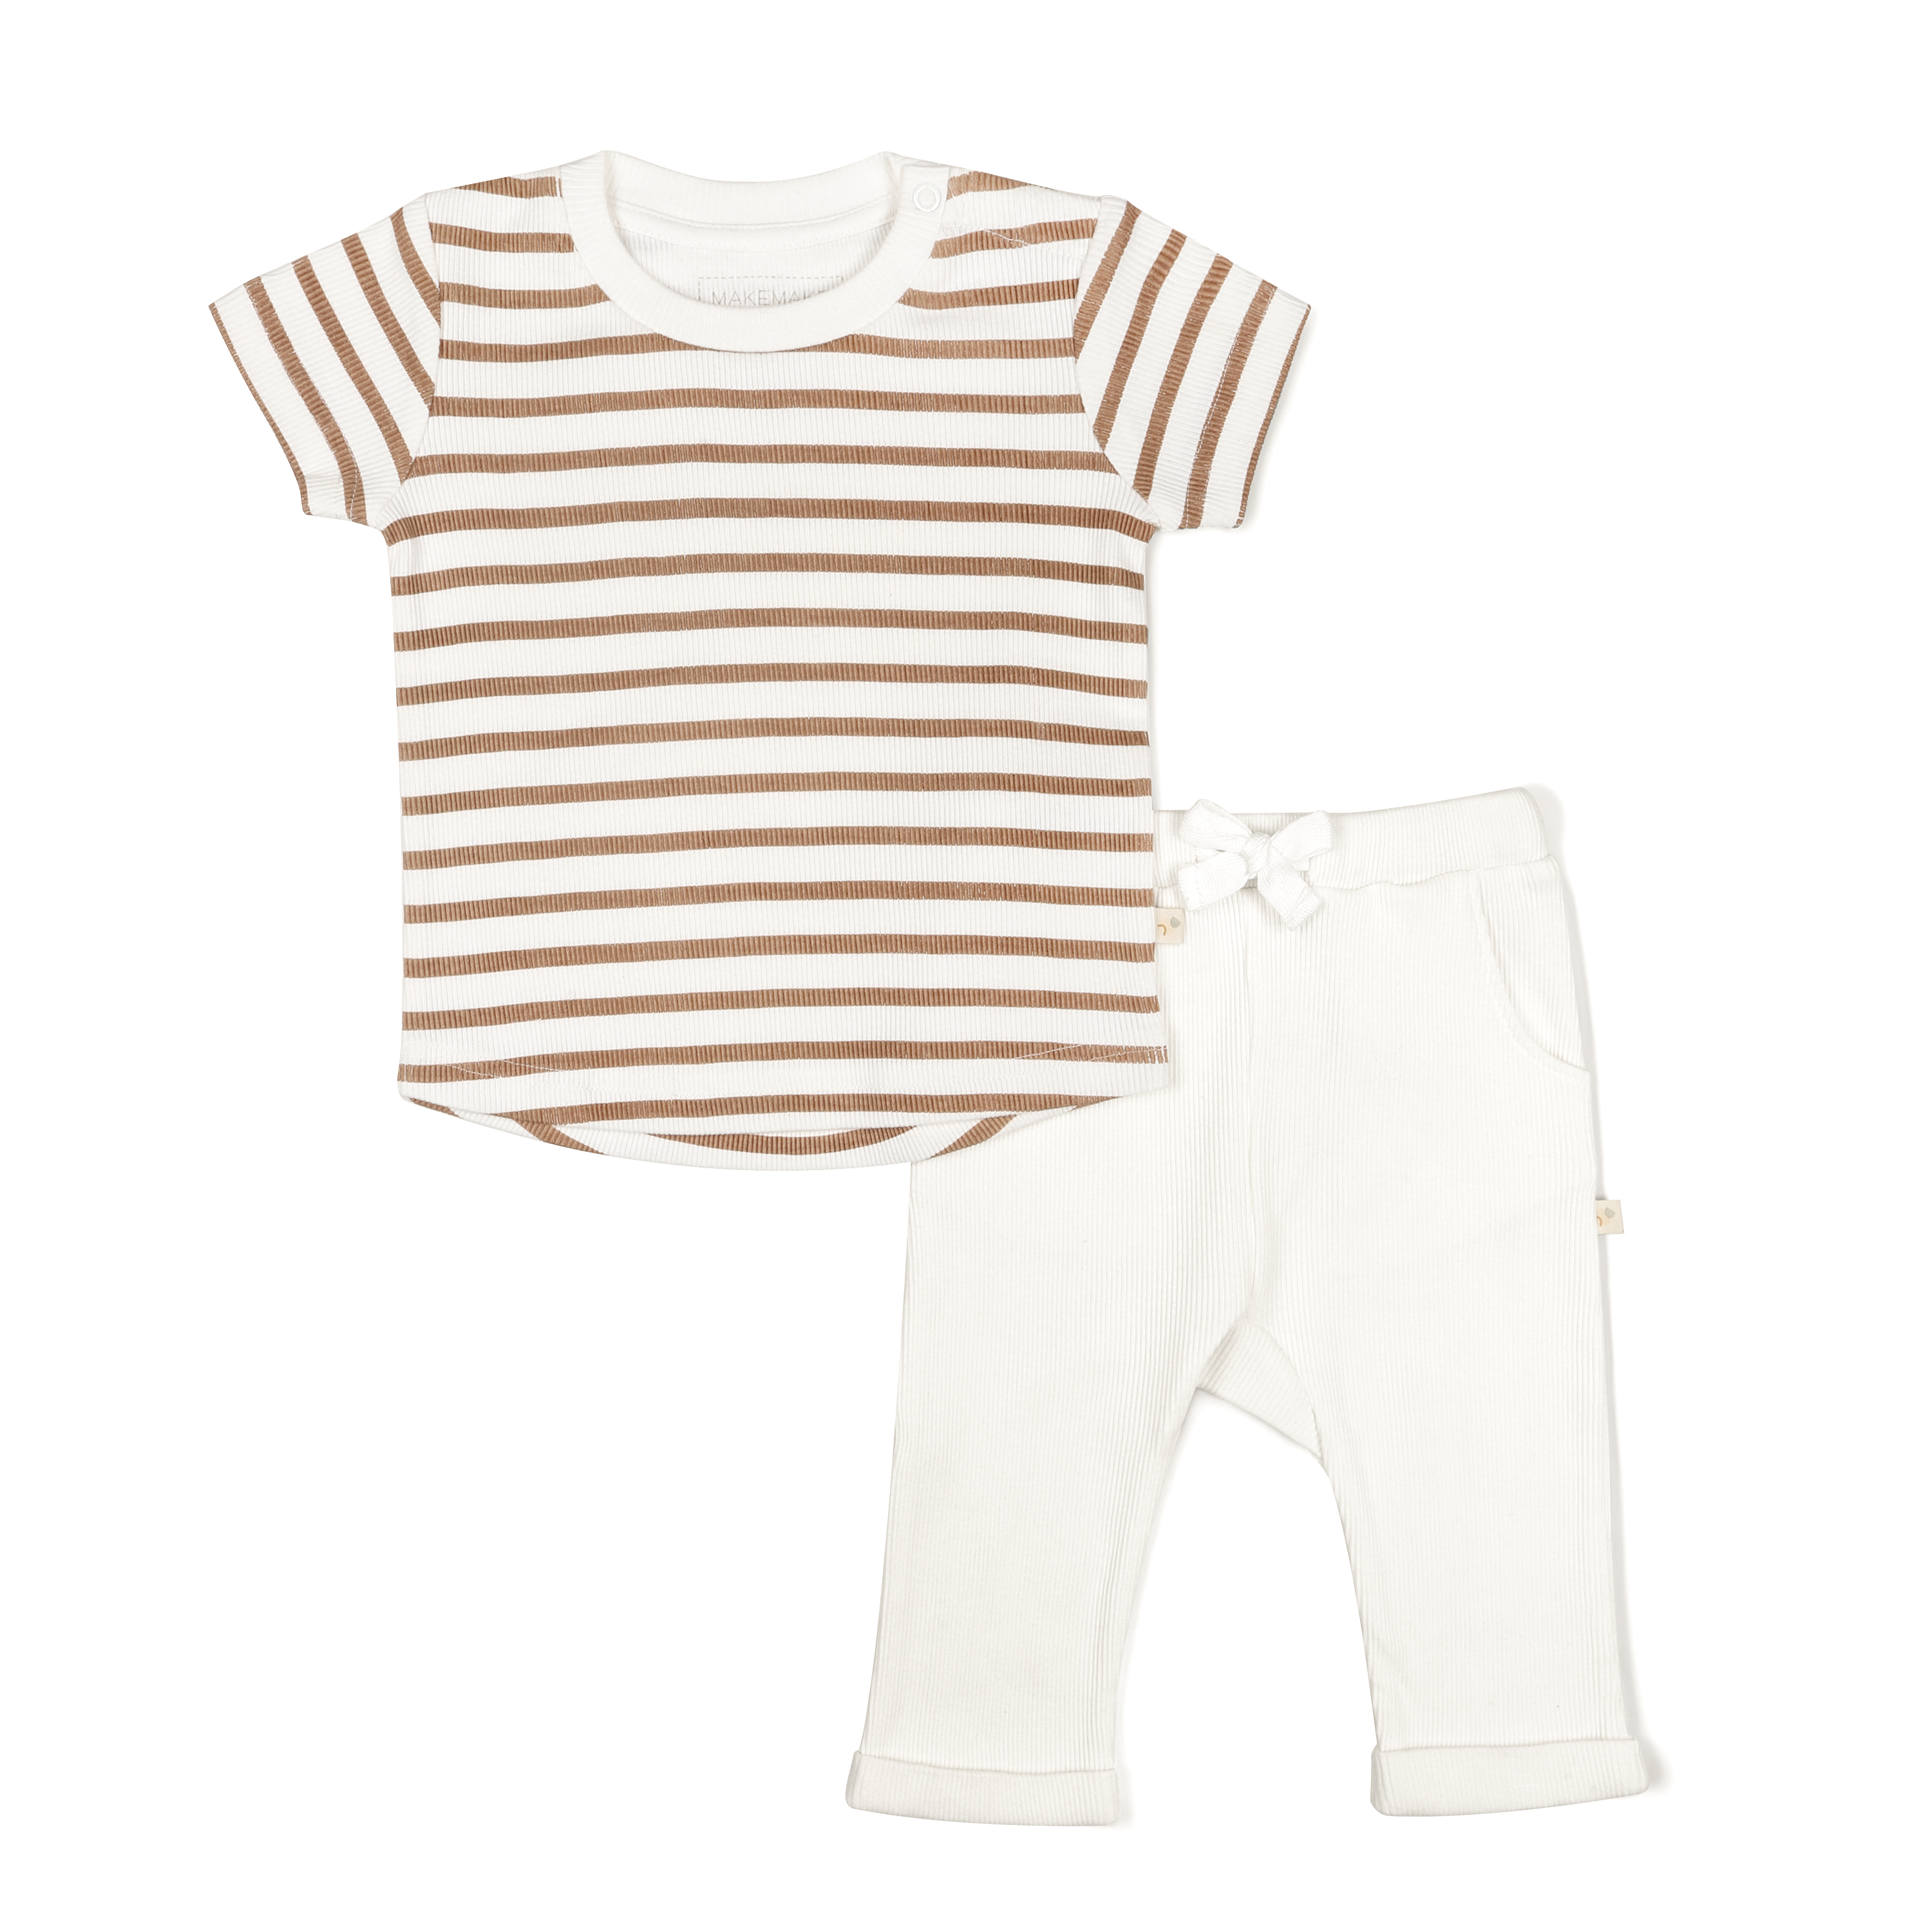 A baby's outfit consisting of the Makemake Organics Organic Tee & Pants Set - Stripes, featuring a striped beige and white short-sleeved t-shirt paired with plain white trousers featuring a small bow on the front.